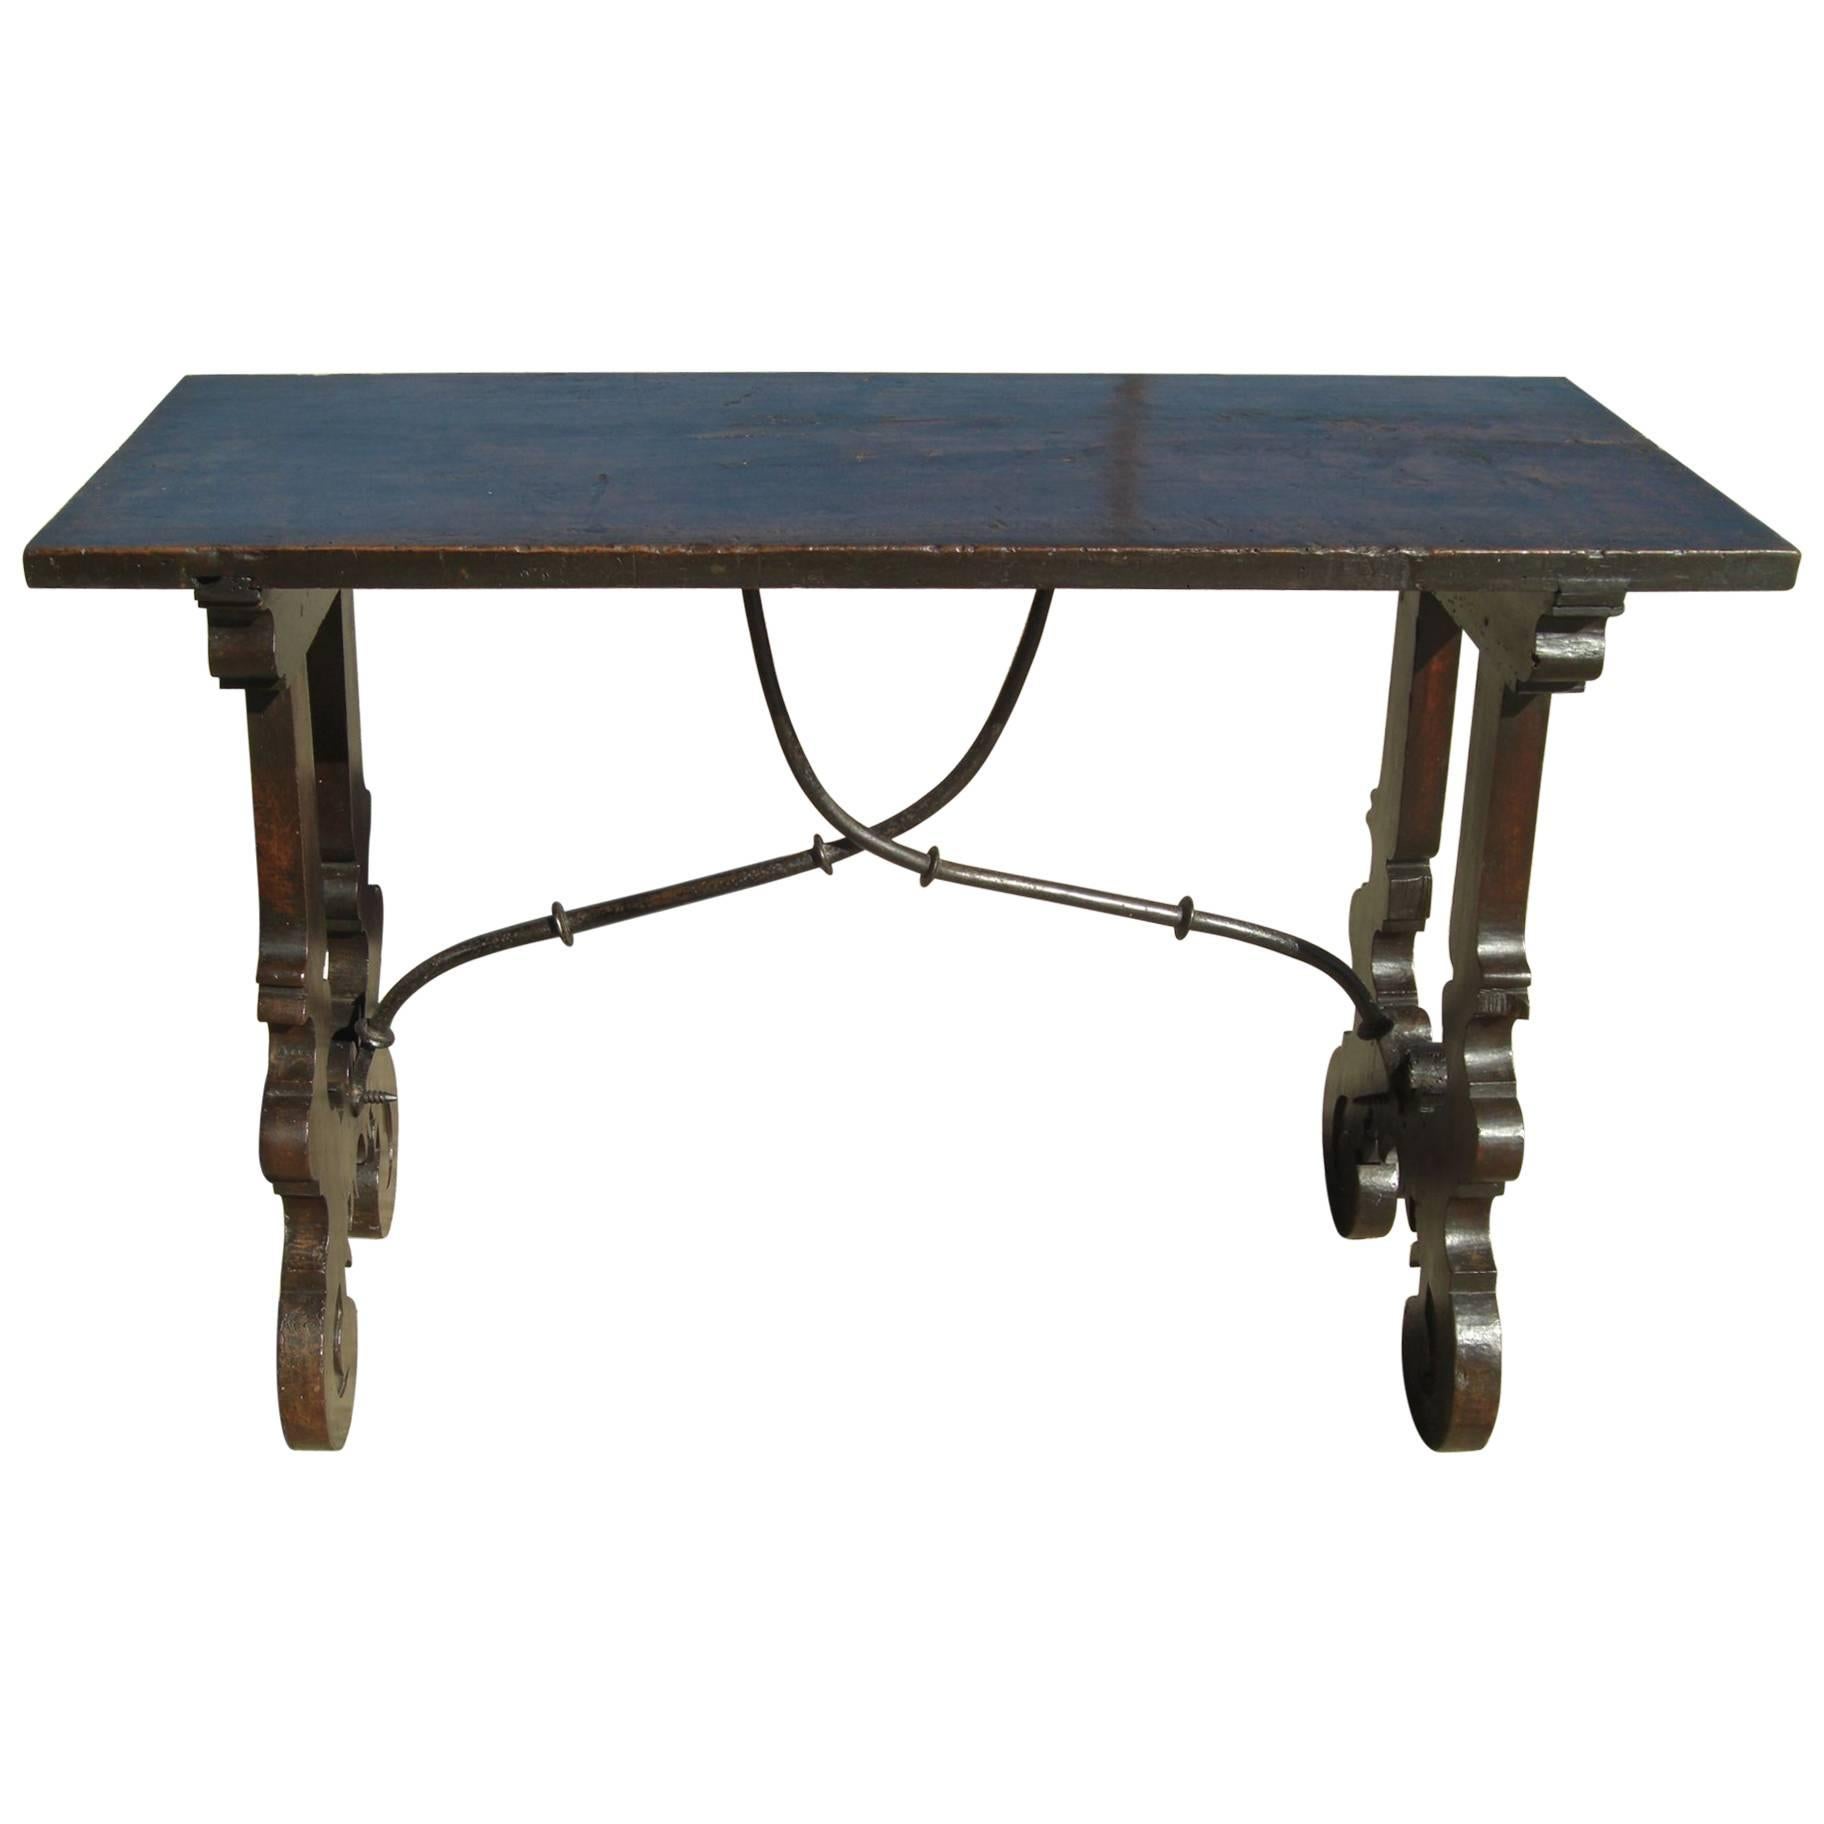 Late 17th-Early 18th Century Walnut Lyre Leg Table with Iron Stretchers